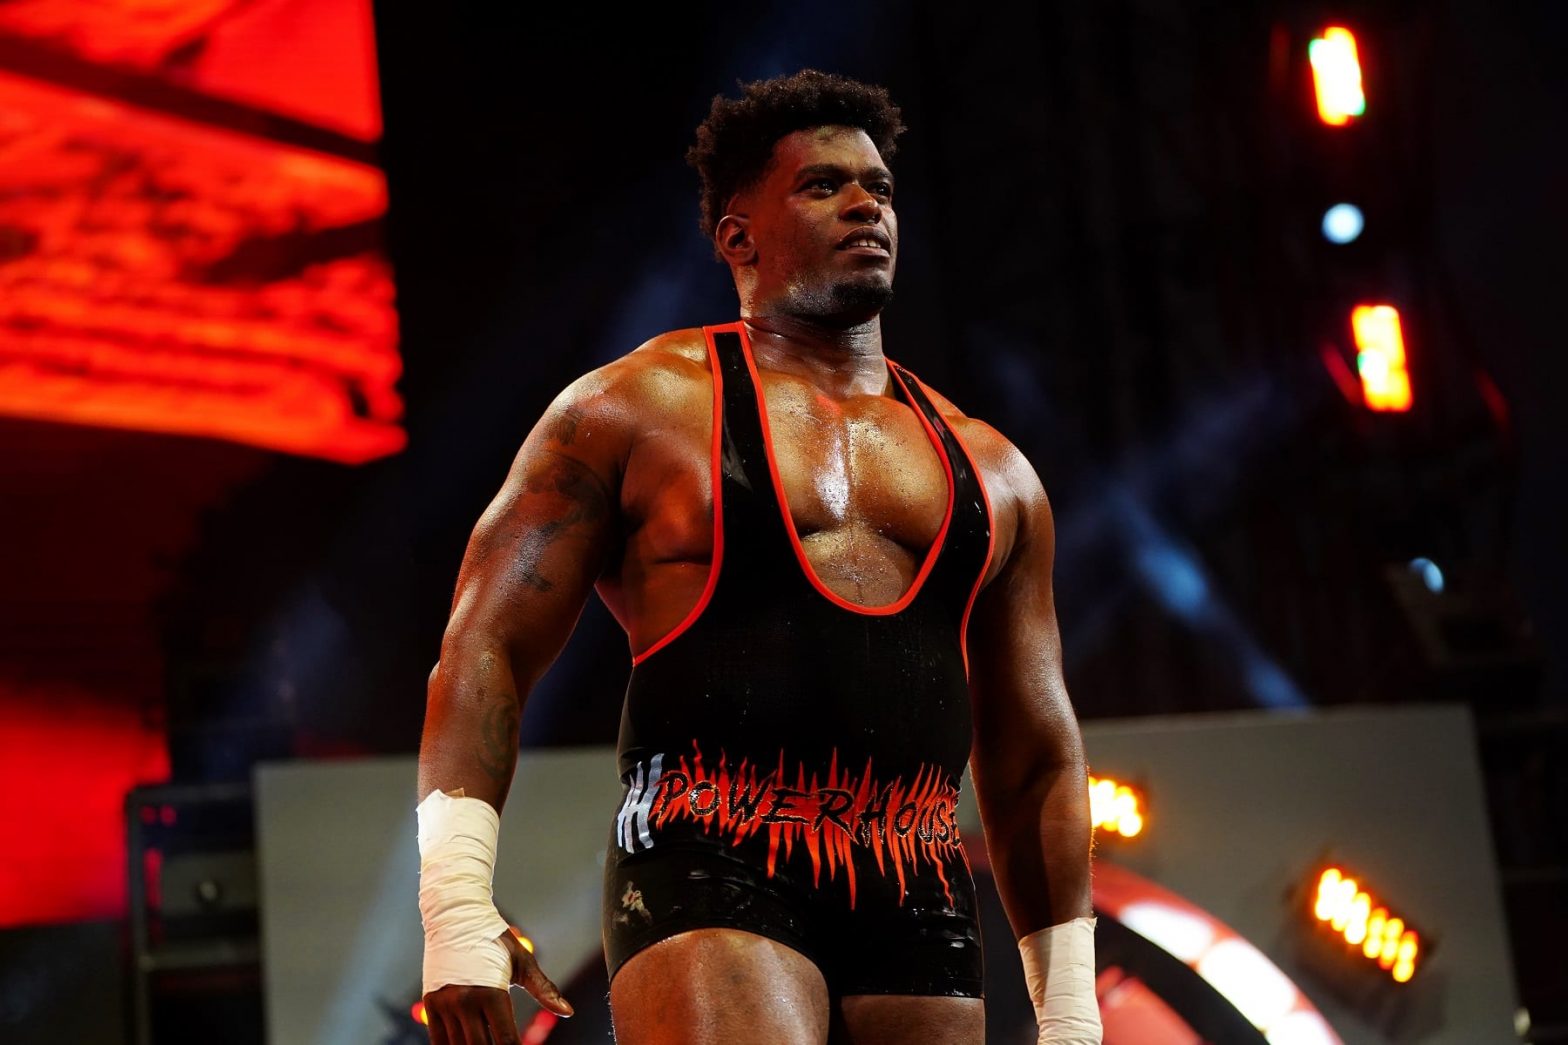 Powerhouse Hobbs Teases “Beef, Beef, And More Beef” For AEW Revolution